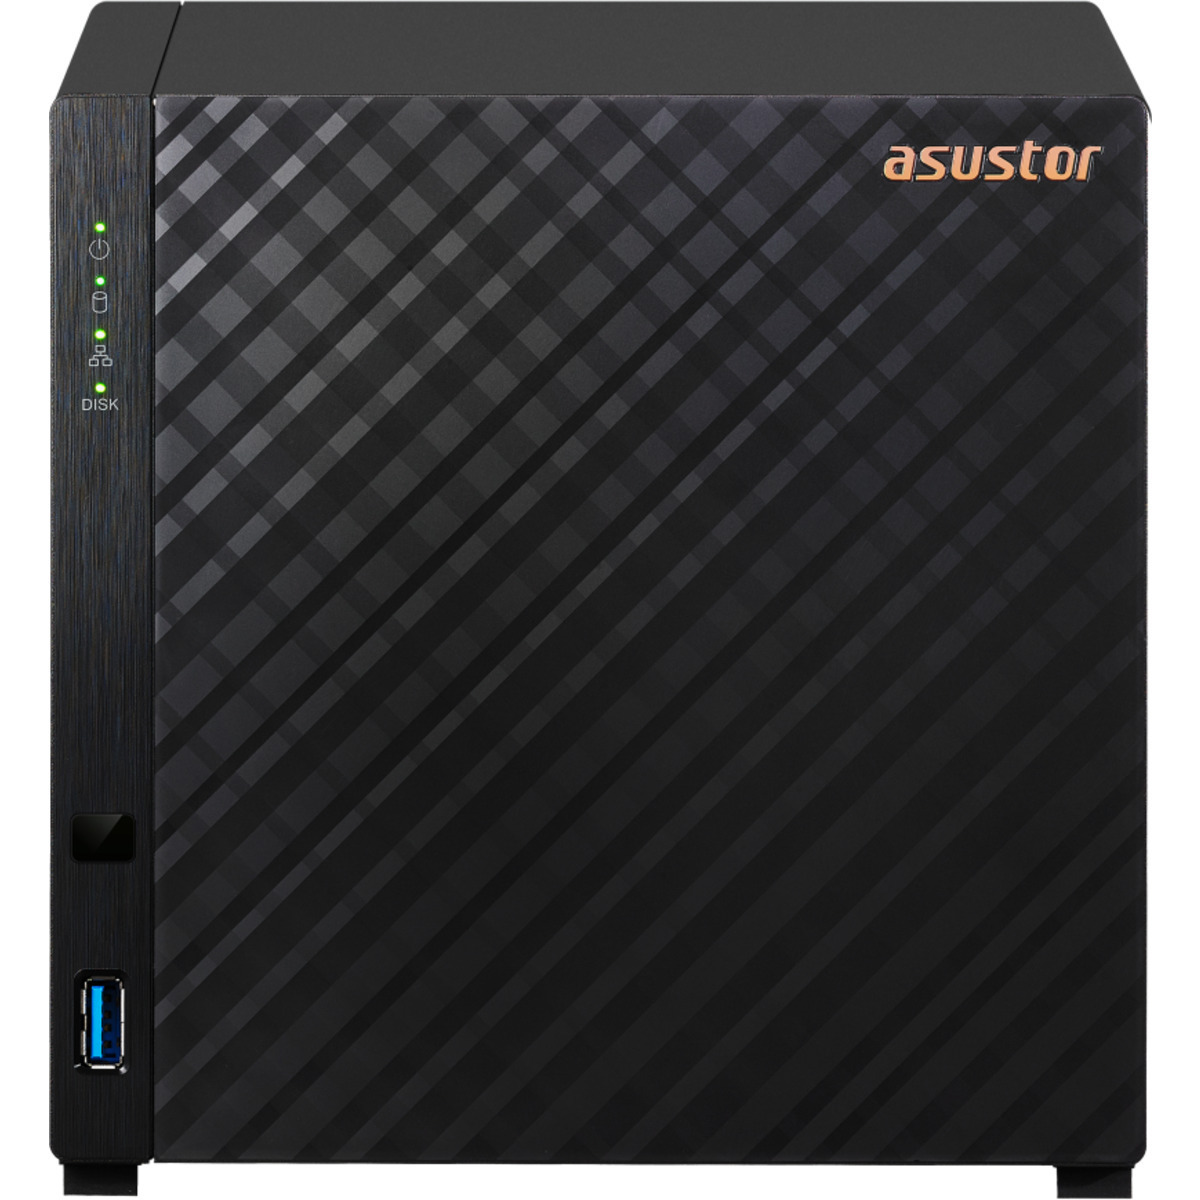 ASUSTOR DRIVESTOR 4 AS1104T 72tb 4-Bay Desktop Personal / Basic Home / Small Office NAS - Network Attached Storage Device 3x24tb Seagate IronWolf Pro ST24000NT002 3.5 7200rpm SATA 6Gb/s HDD NAS Class Drives Installed - Burn-In Tested DRIVESTOR 4 AS1104T